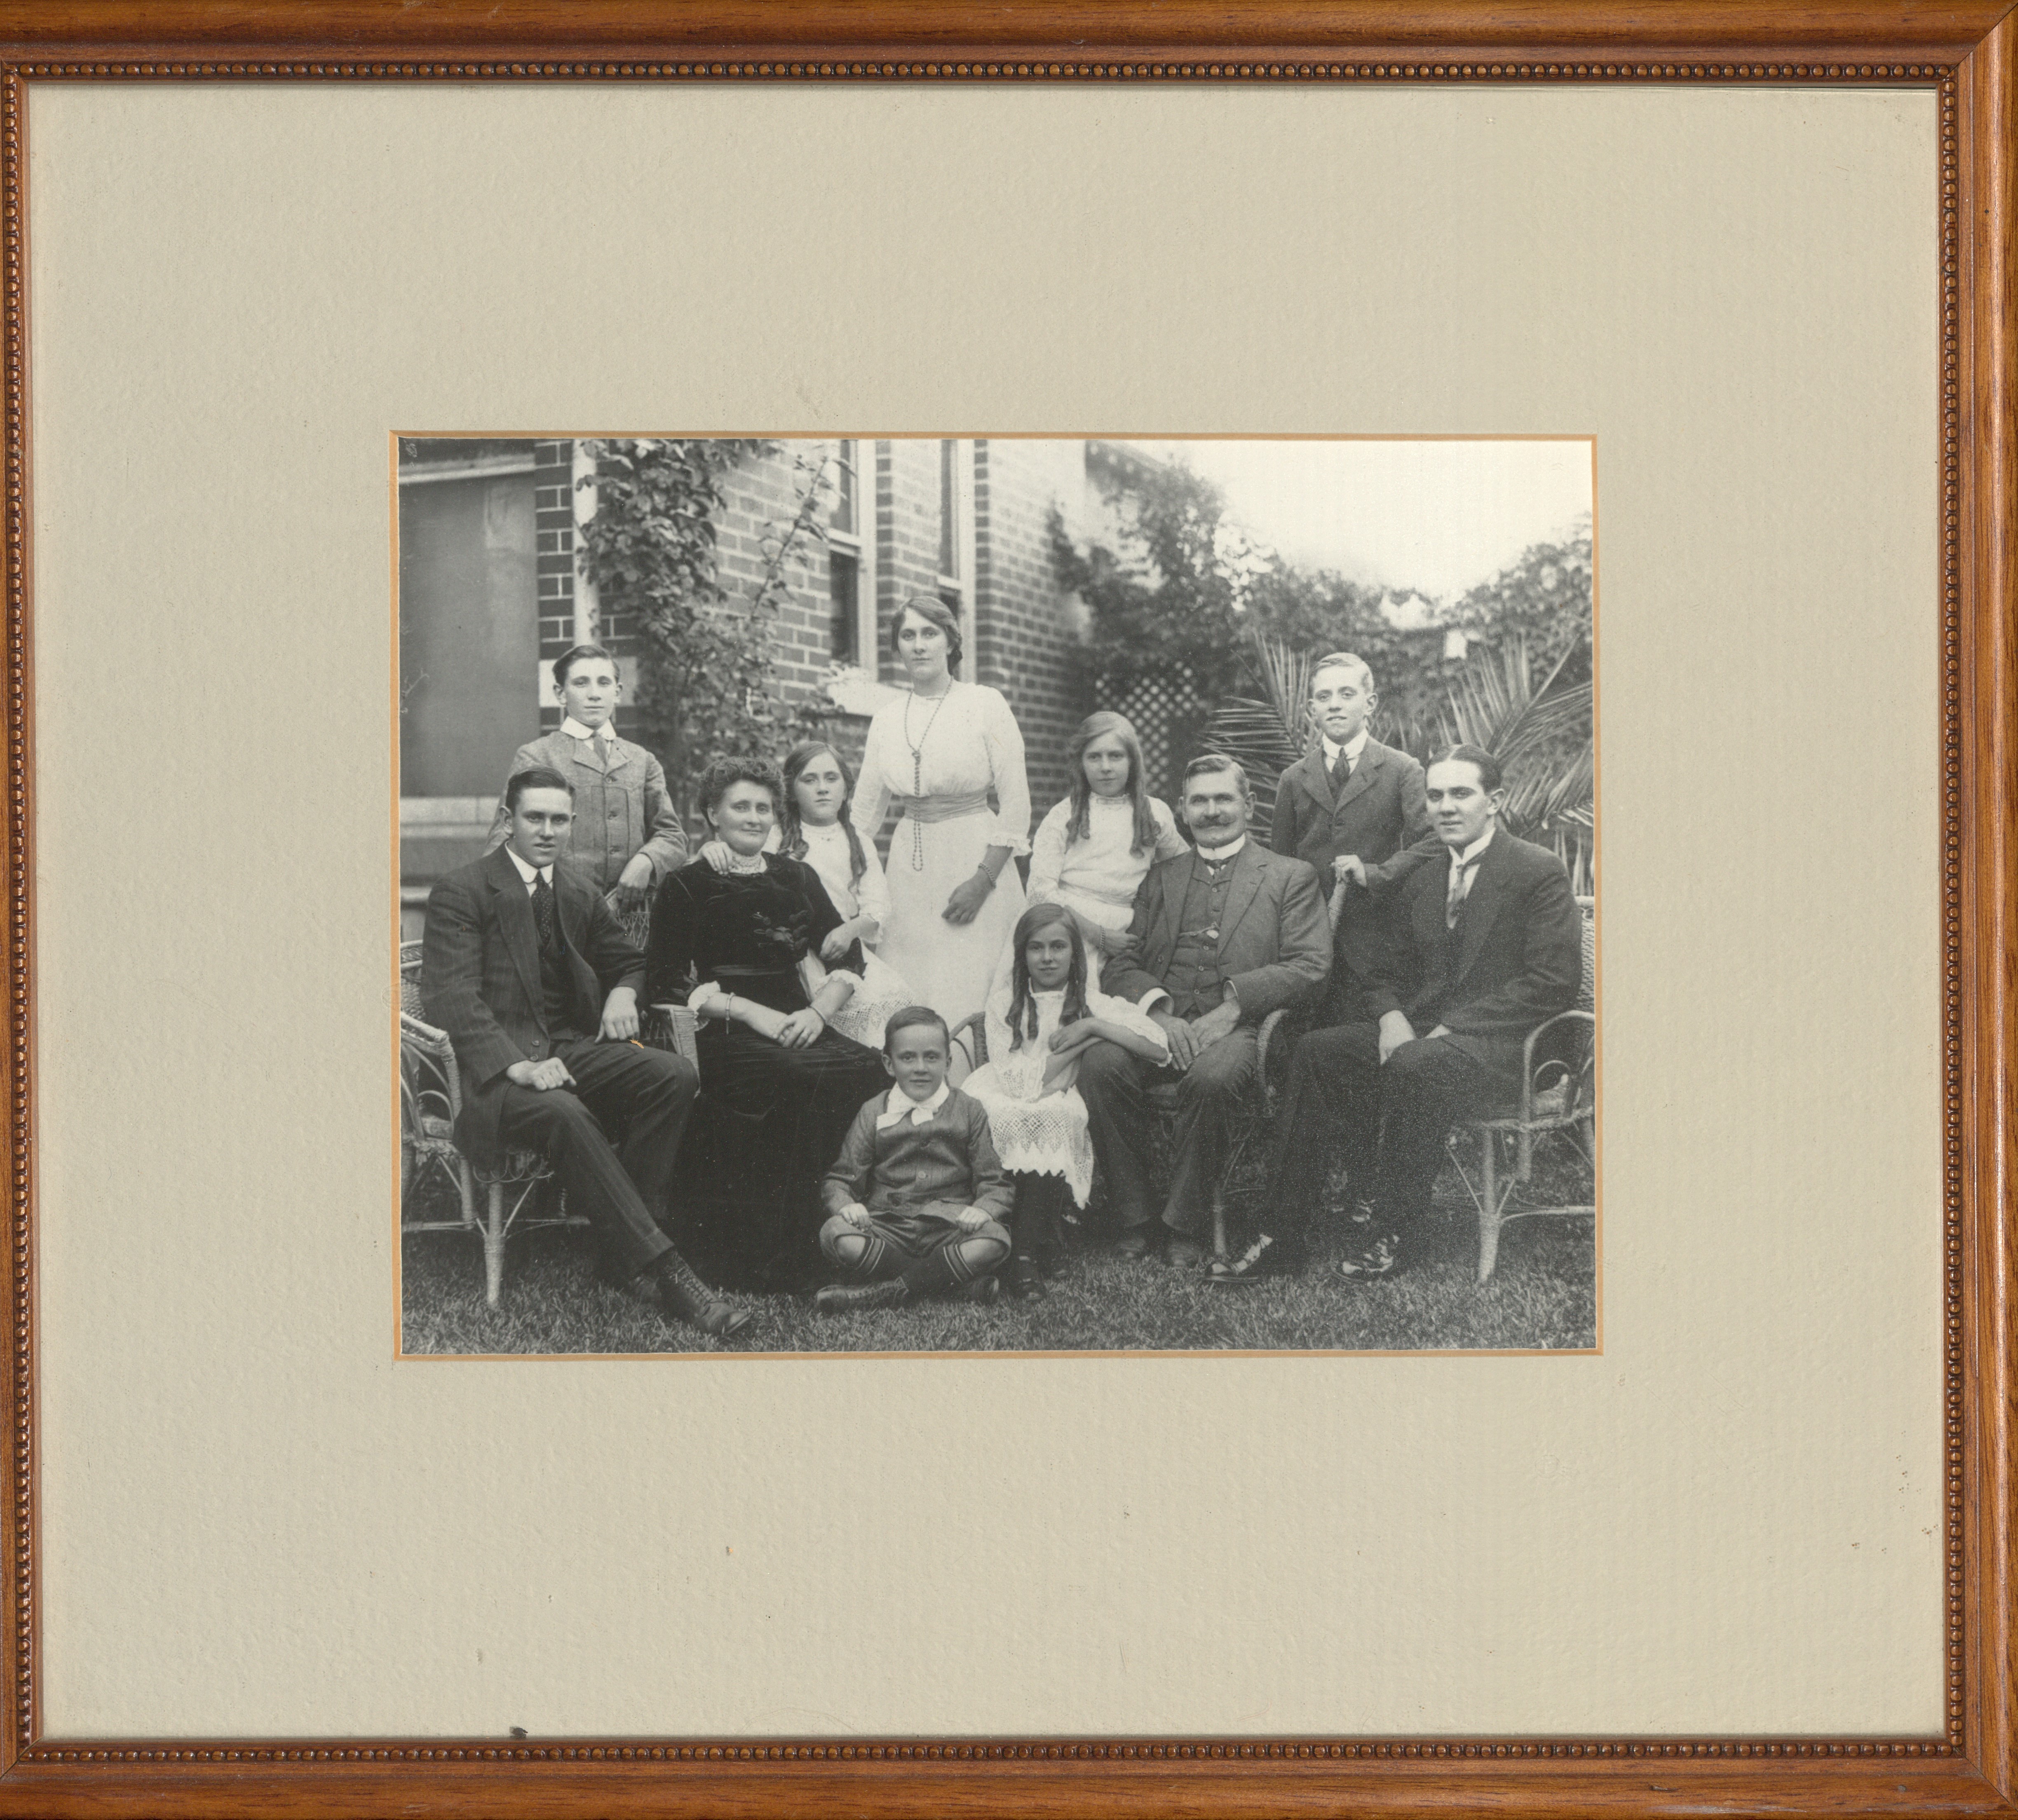 Image of Benjamin Easter and Eleanor Johnson Nee Agar and family. Left to right: George, Tom, Eleanor, Ettie, Emma, Fred, Gertie, Ellie, Benjamin [LHRN5320-1]